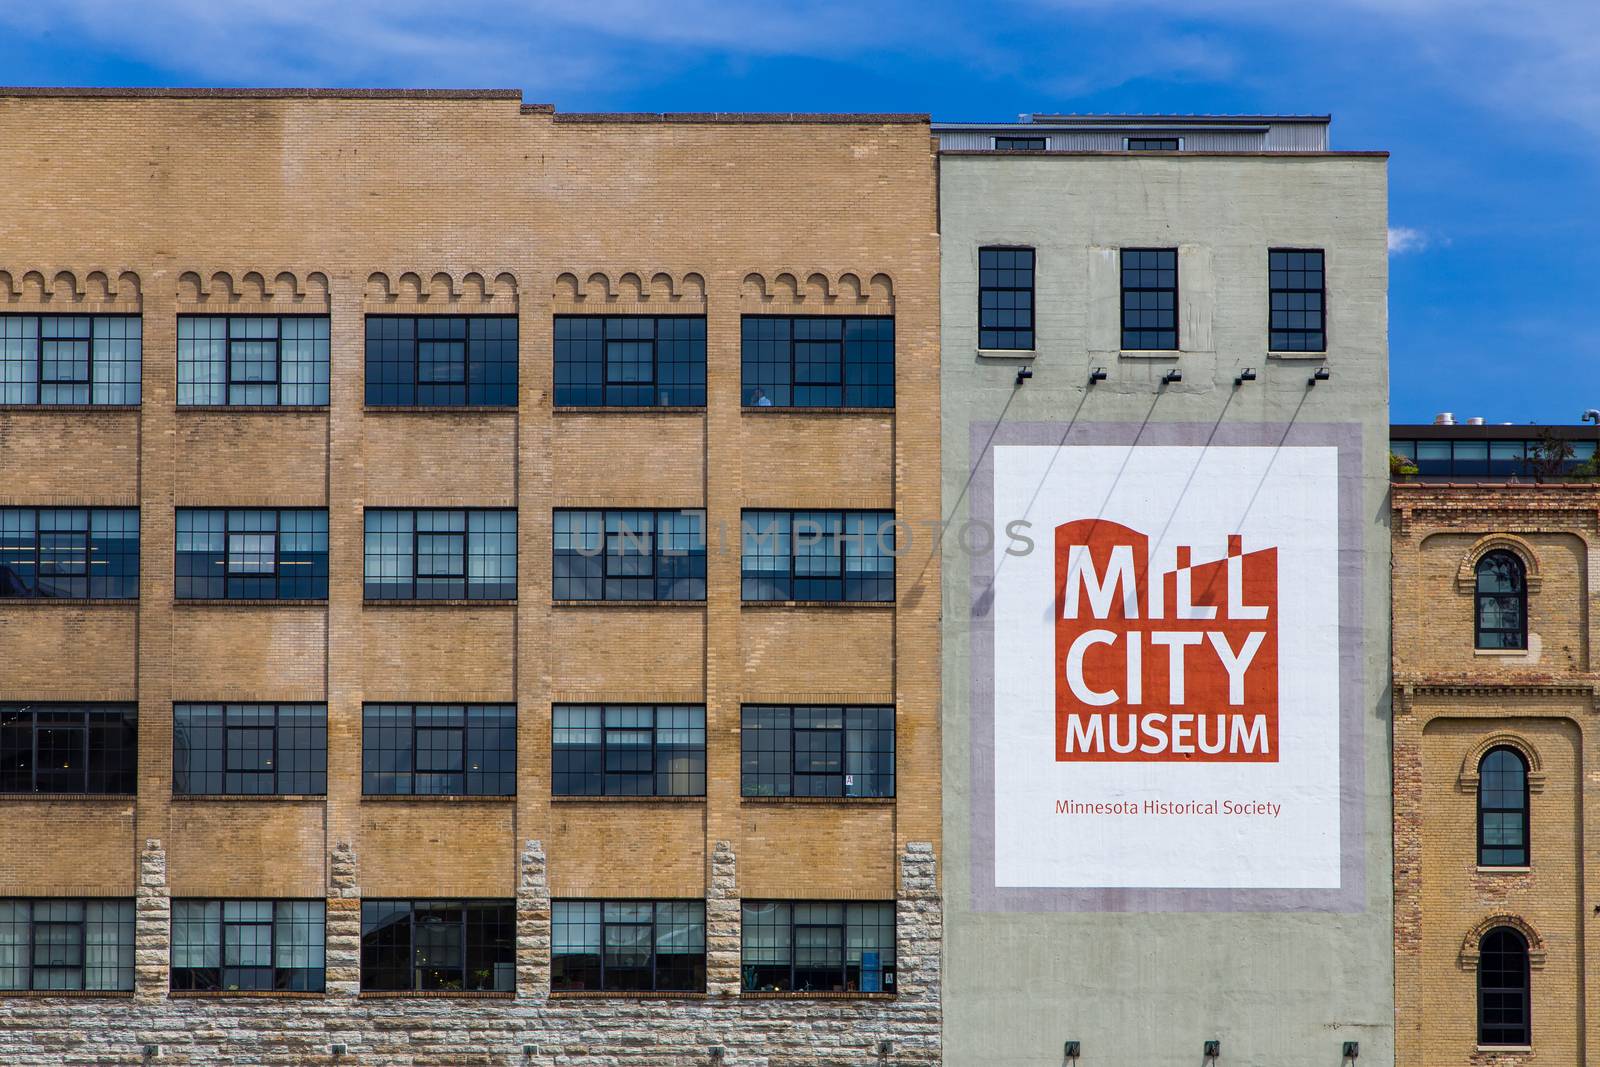 MINNEAPOLIS, MN/USA - AUGUST 5, 2015: The Mill City Museum. Mill City Museum is a Minnesota Historical Society museum on the banks of the Mississippi River.